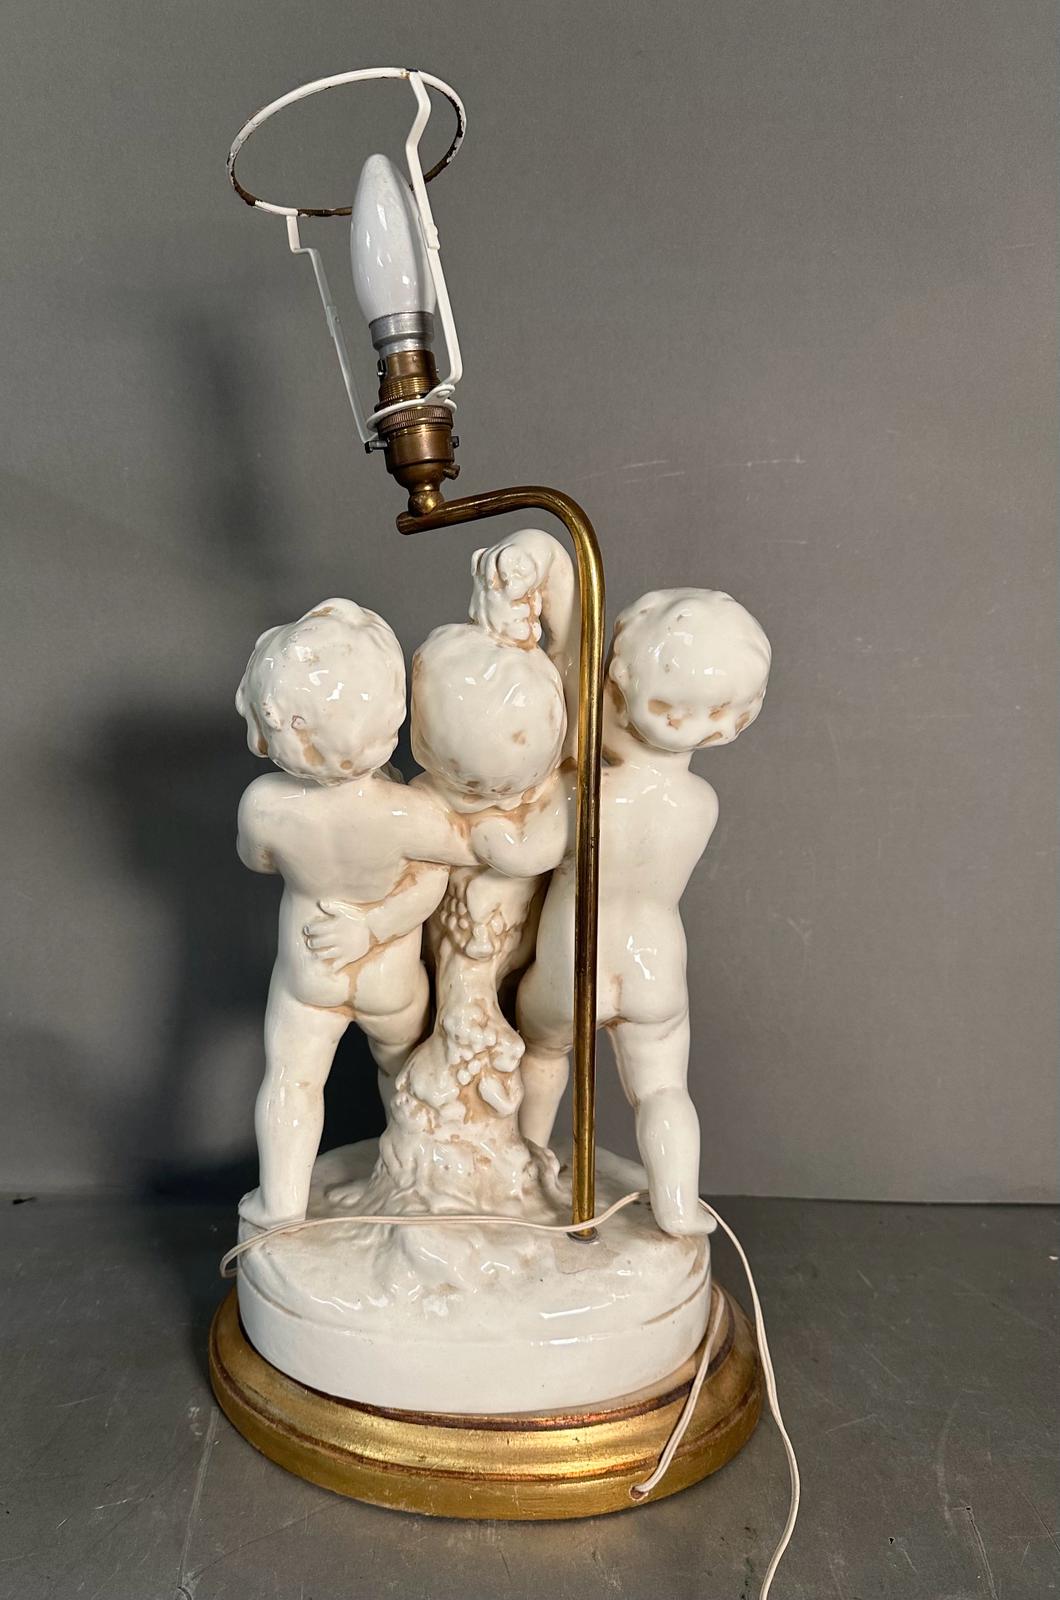 A white ceramic figural cherub table lamp on gold painted base - Image 4 of 10